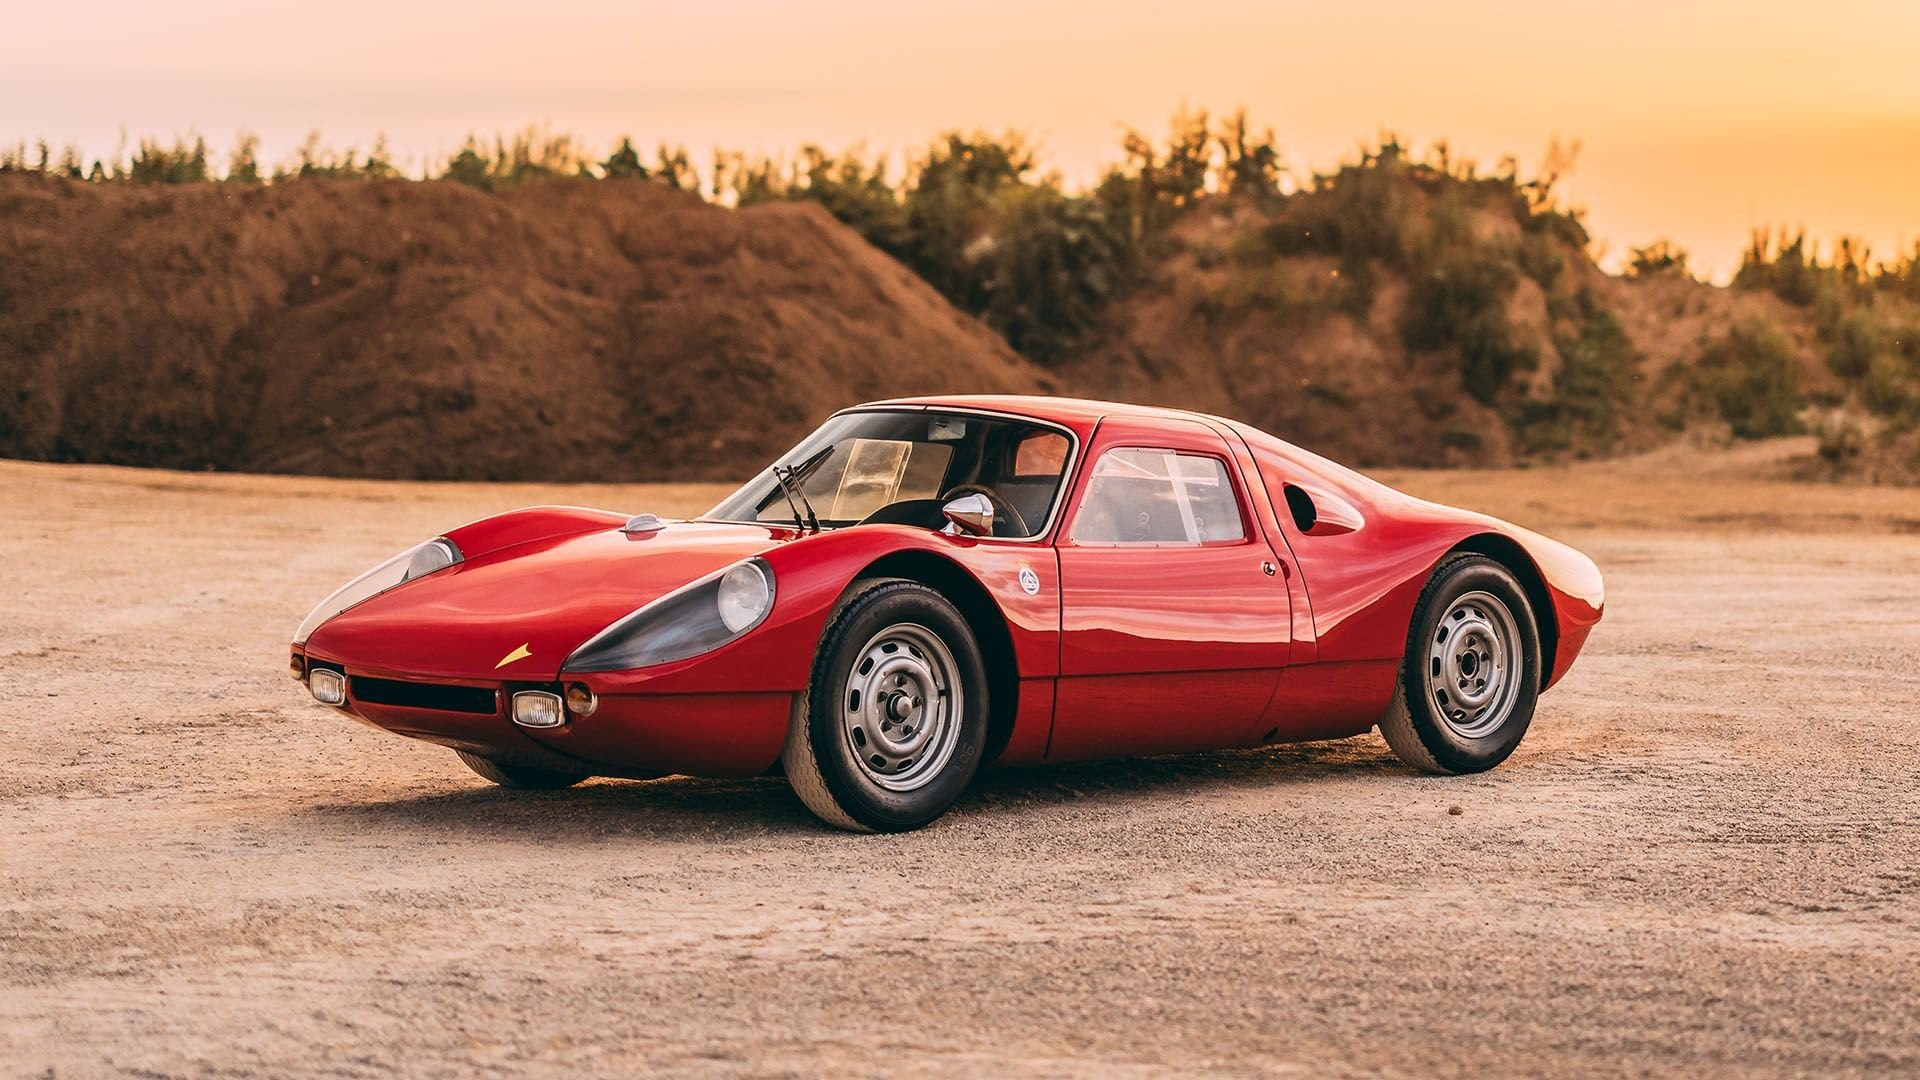 1964 Porsche 904 Carrera GTS Offered at Broad Arrow Auctions